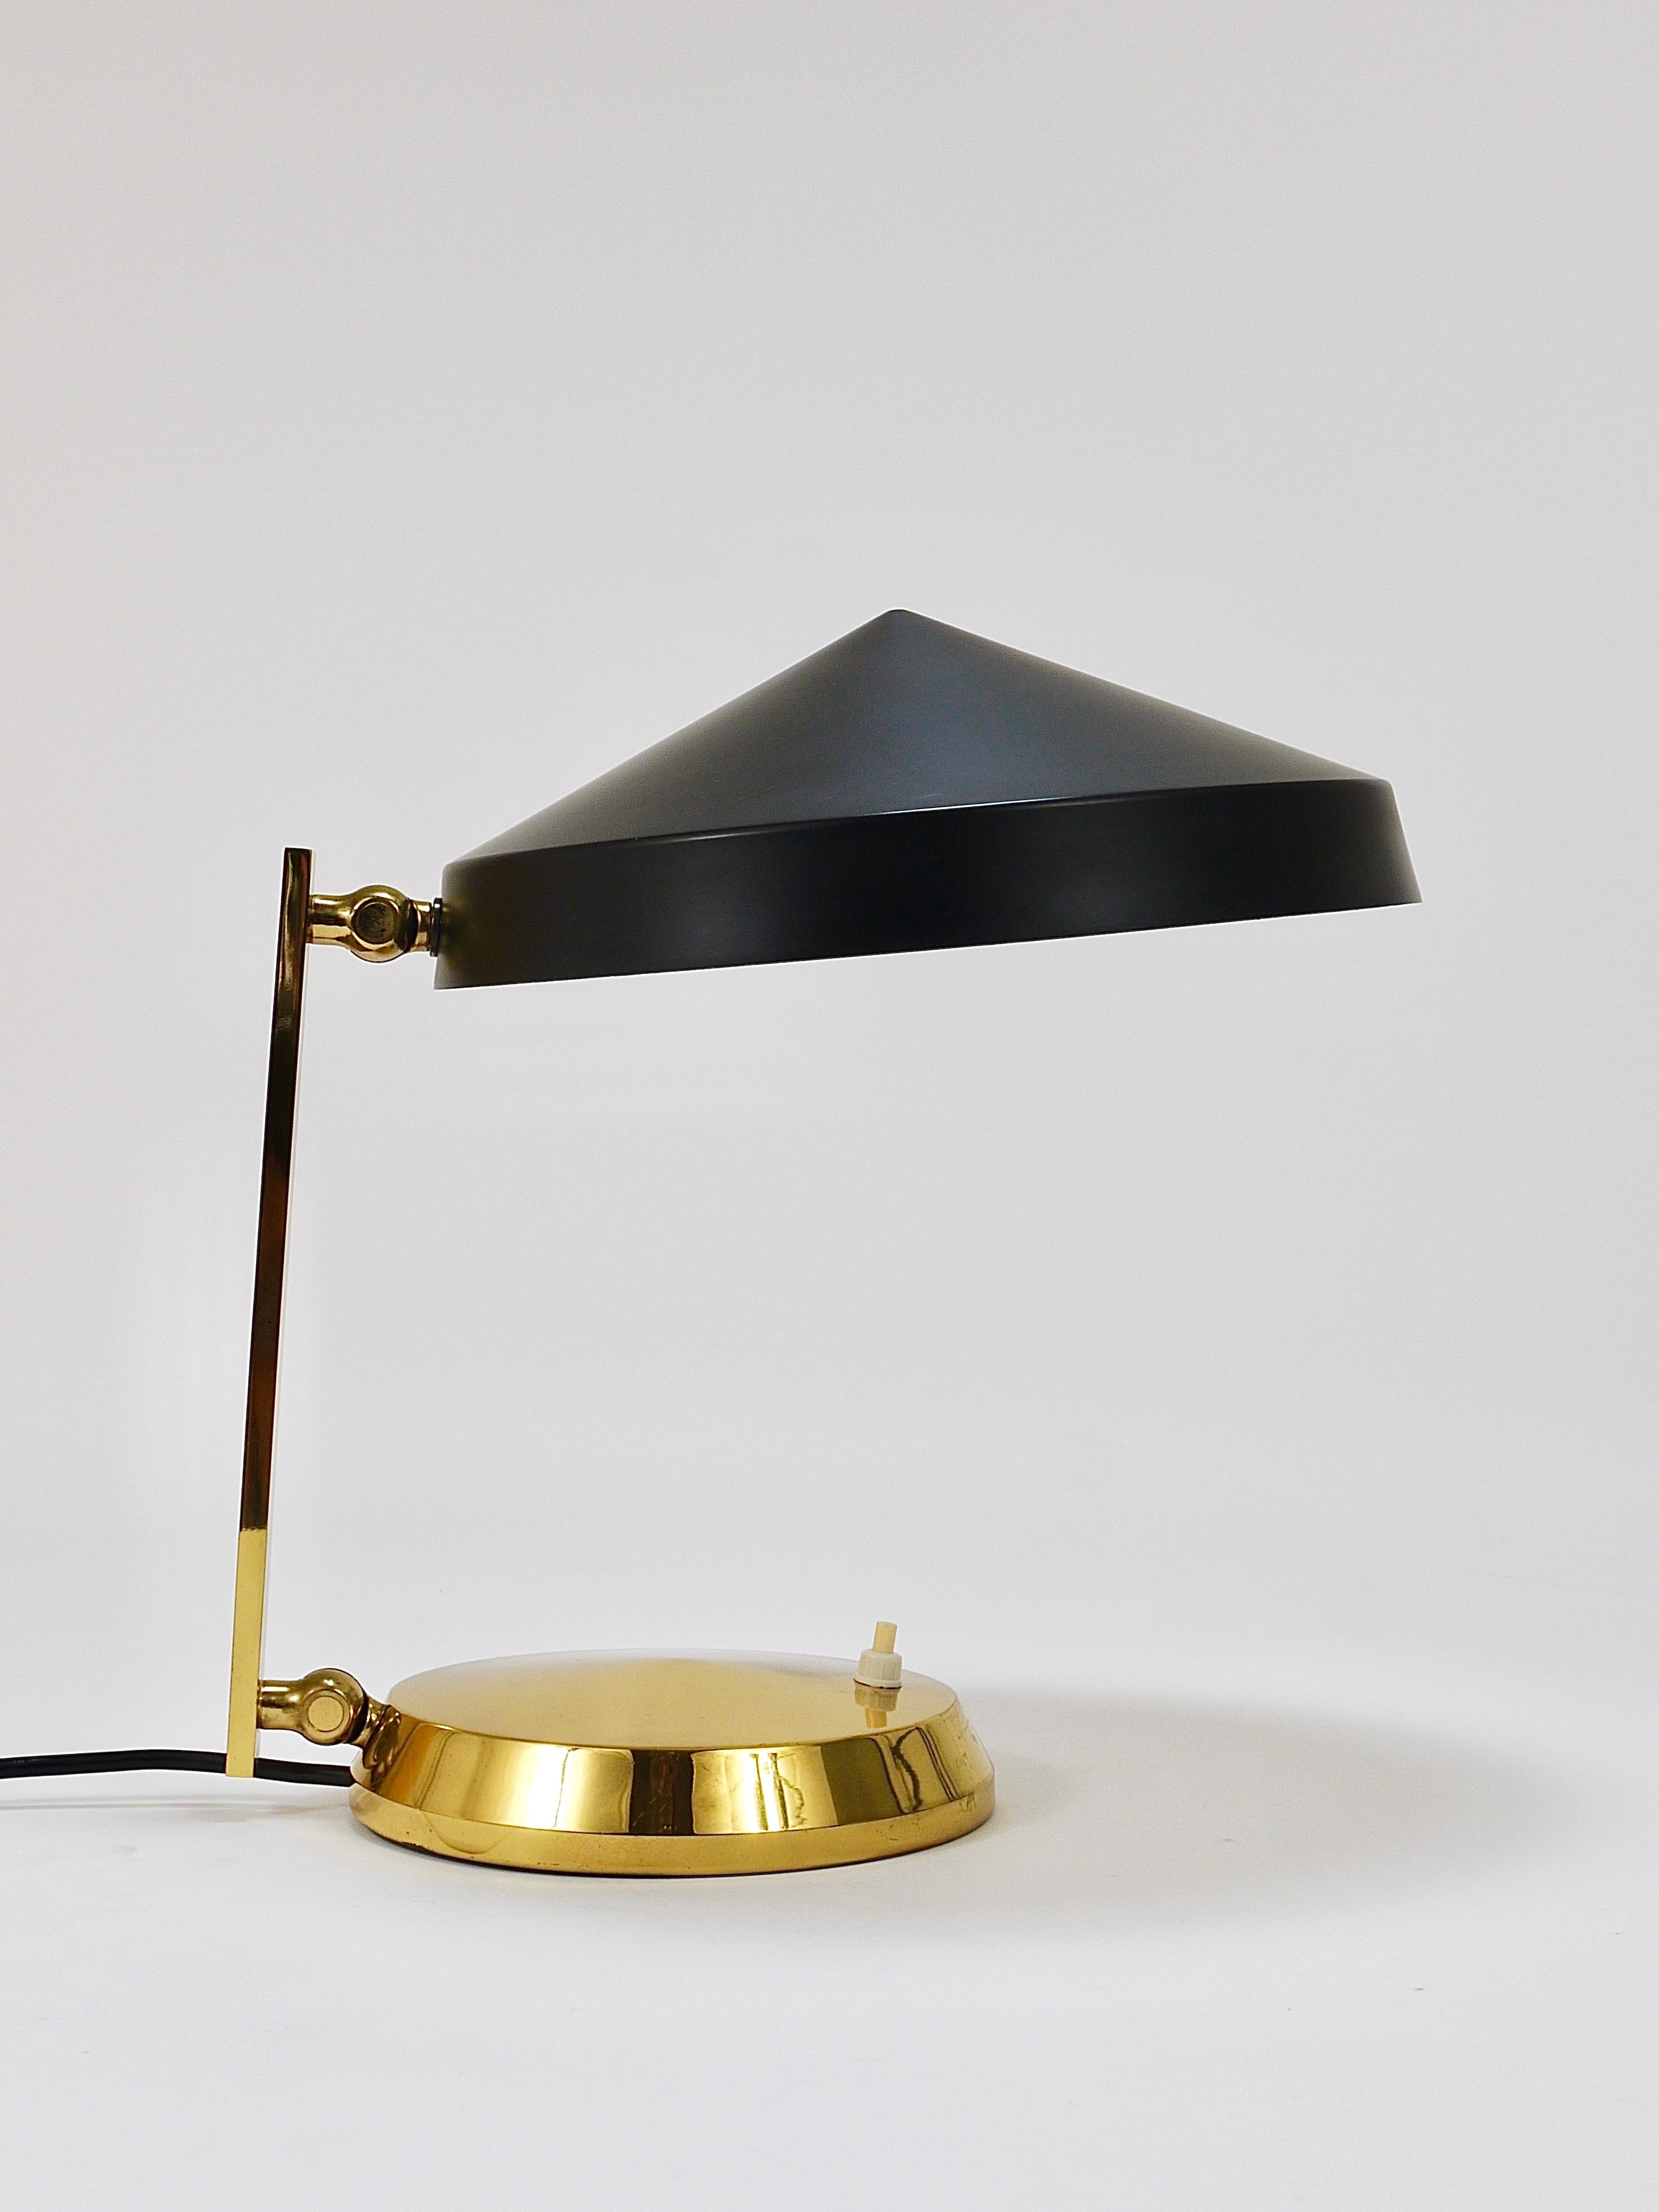 A beautiful Mid-Century table or desk lamp from the 1960s, made in Austria. This charming light a brass base with an adjustable neck and a wonderful black conical aluminum lampshade with white interior. In good condition with nice patina. In the